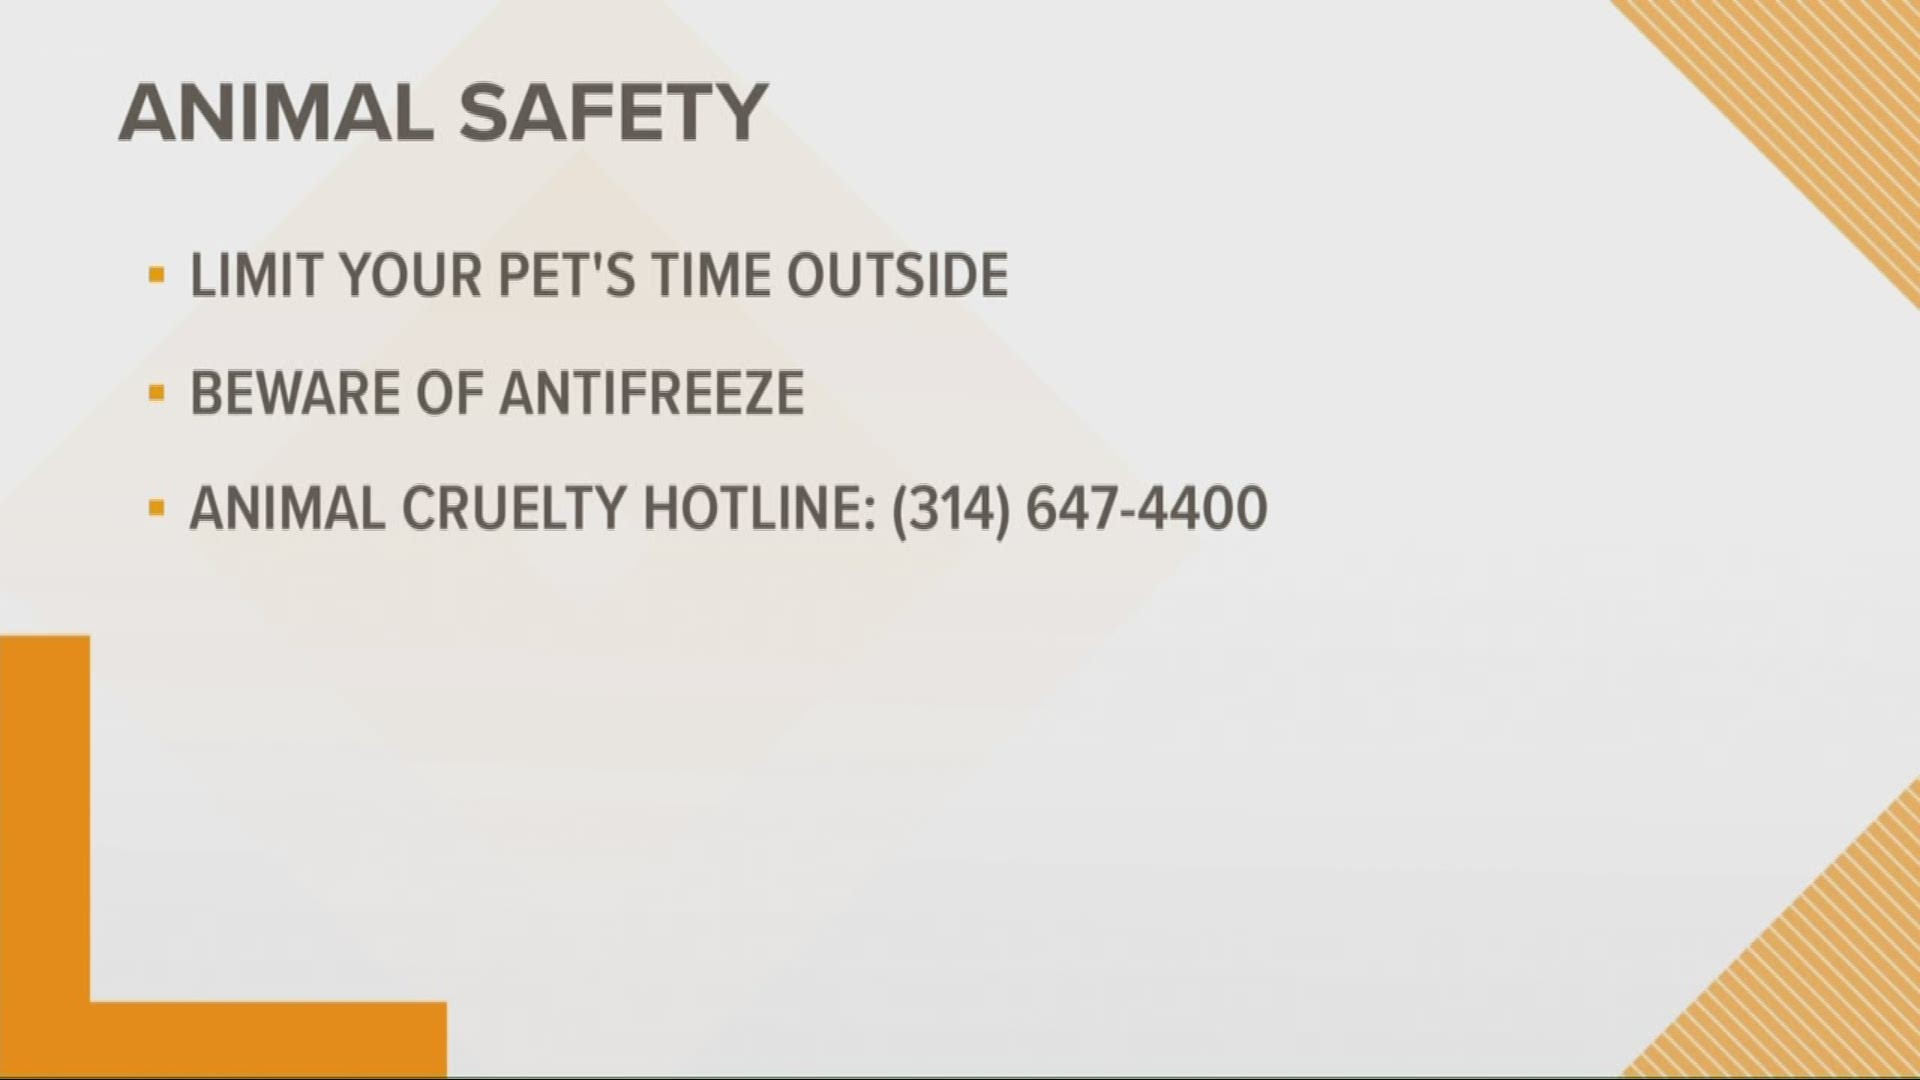 The cold weather is tough on our four-legged friends. The Humane Society of Missouri is urging pet owners to keep your pets safe in the freezing temperatures.